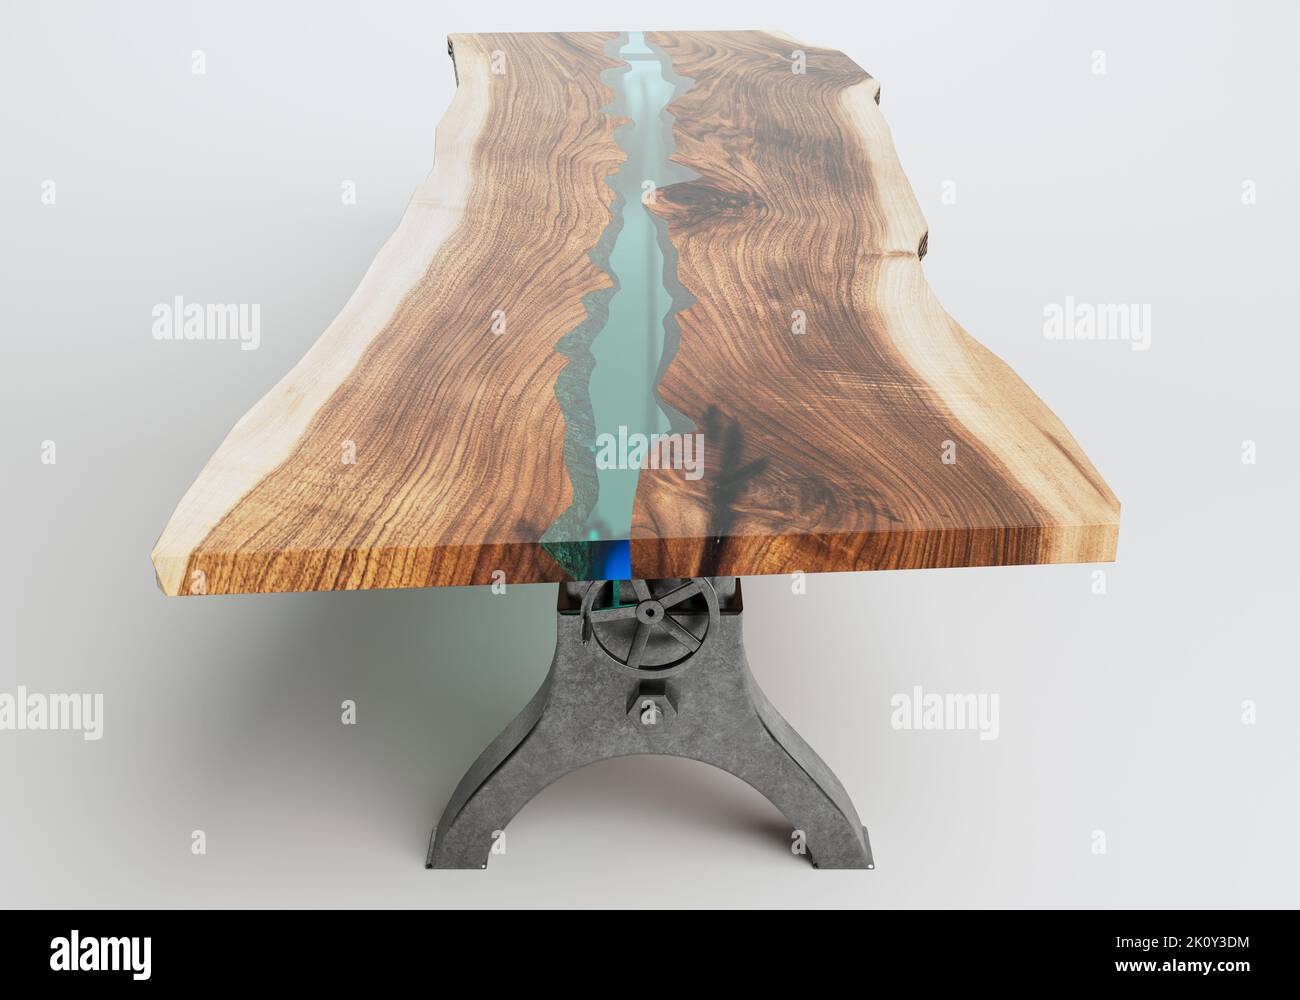 A conference room table with adjustable metal legs and a natural wooden slab surface with a blue resin inlay on an isolated studio background- 3D rend Stock Photo